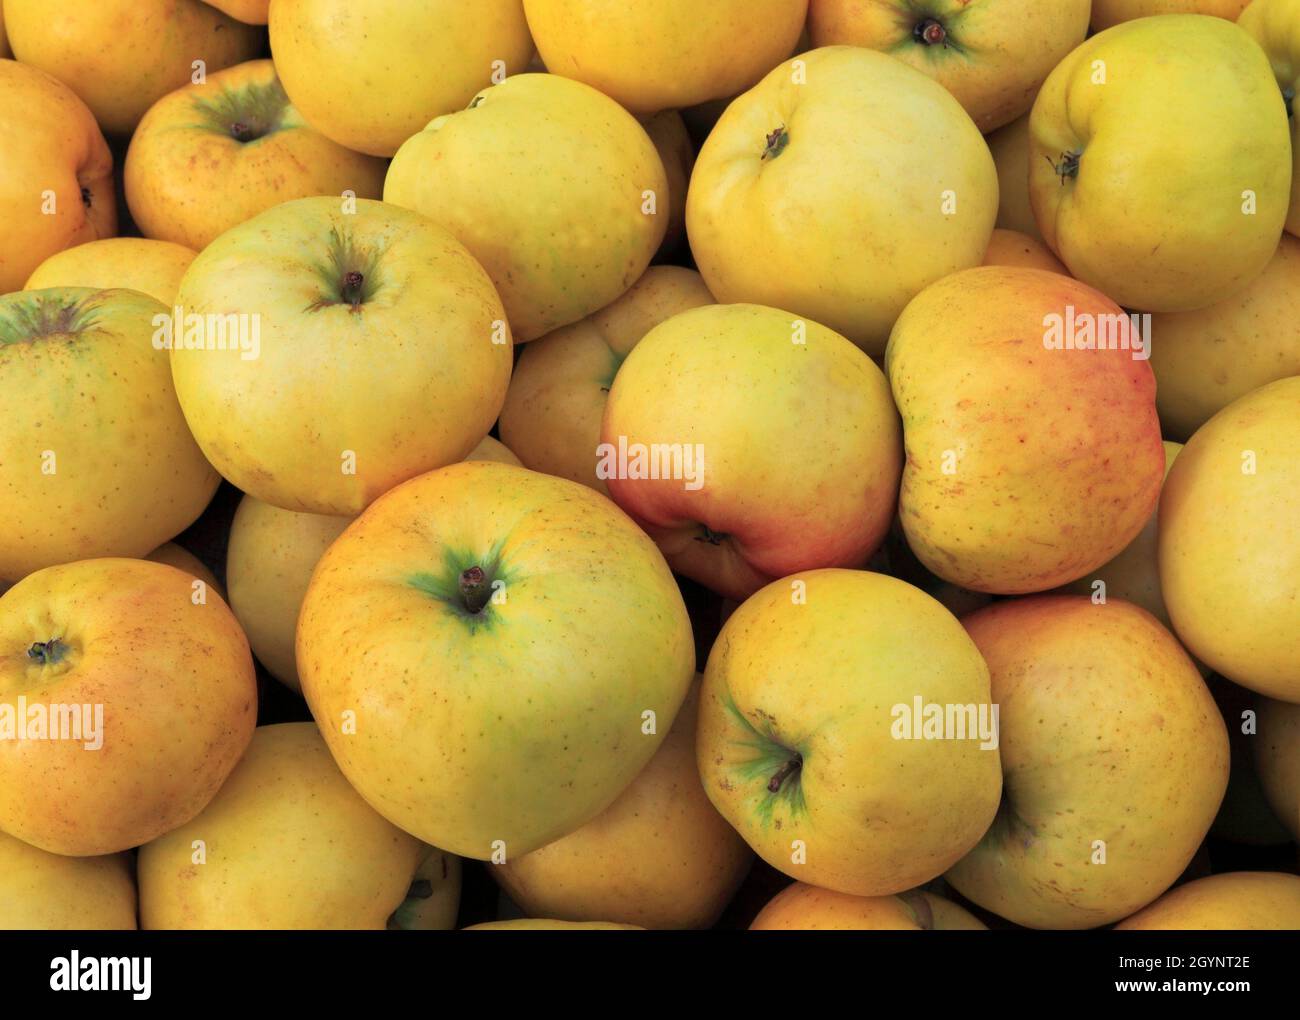 Apple, apples, 'Banns', variety, farm shop, display, malus domestica, fruit, healthy eating Stock Photo